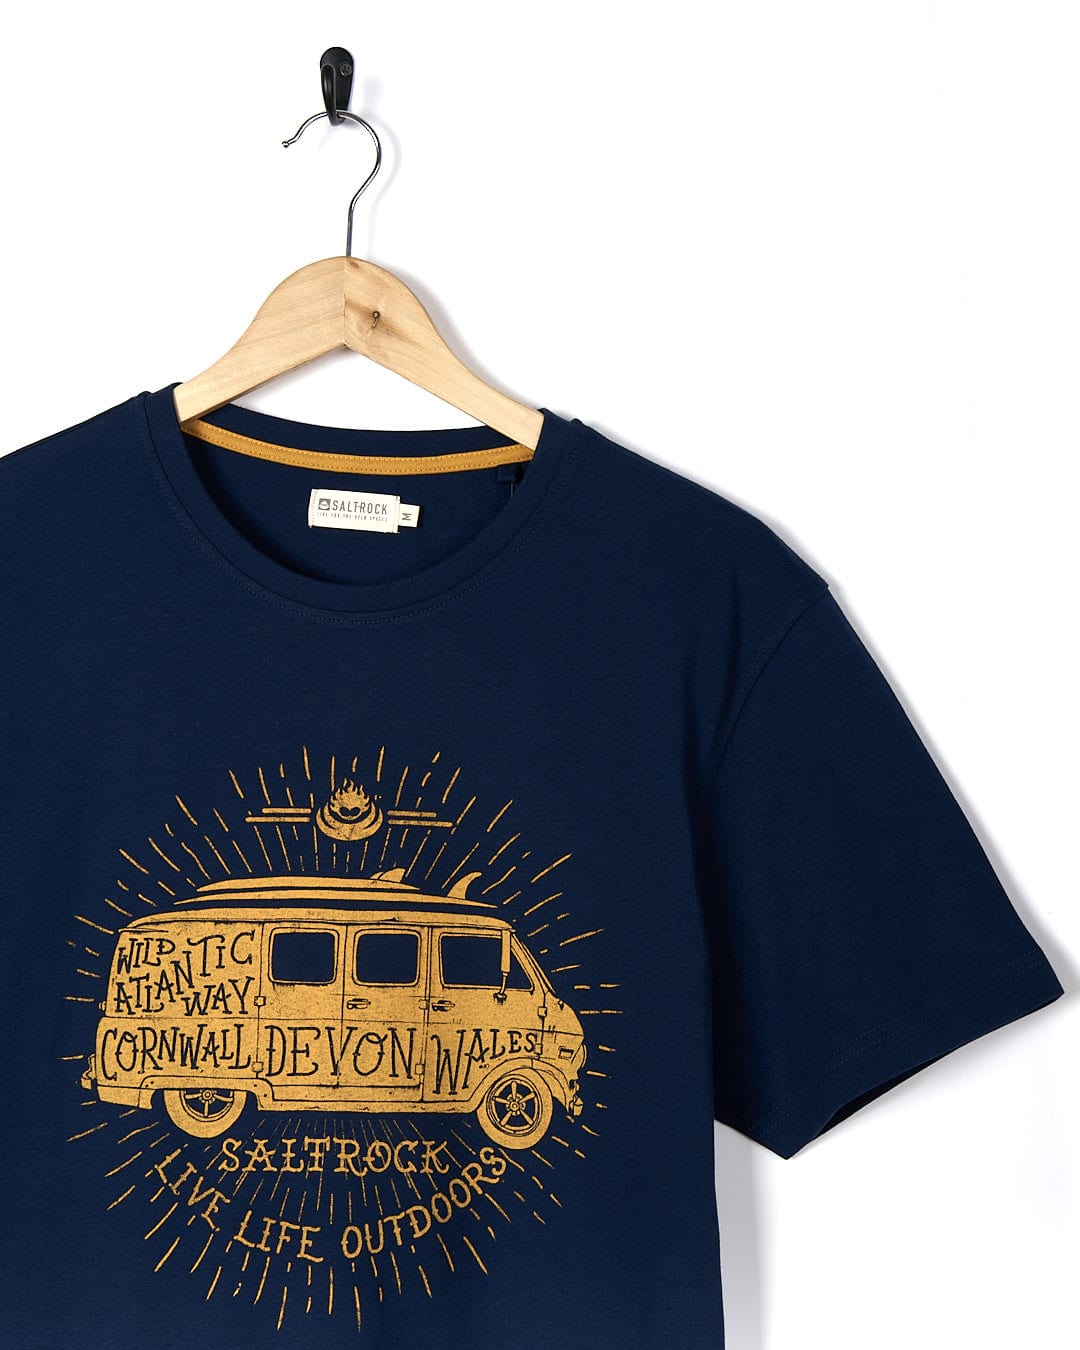 A Saltrock Live Life Location - Mens Short Sleeve T-Shirt - Blue with an image of a van on it.